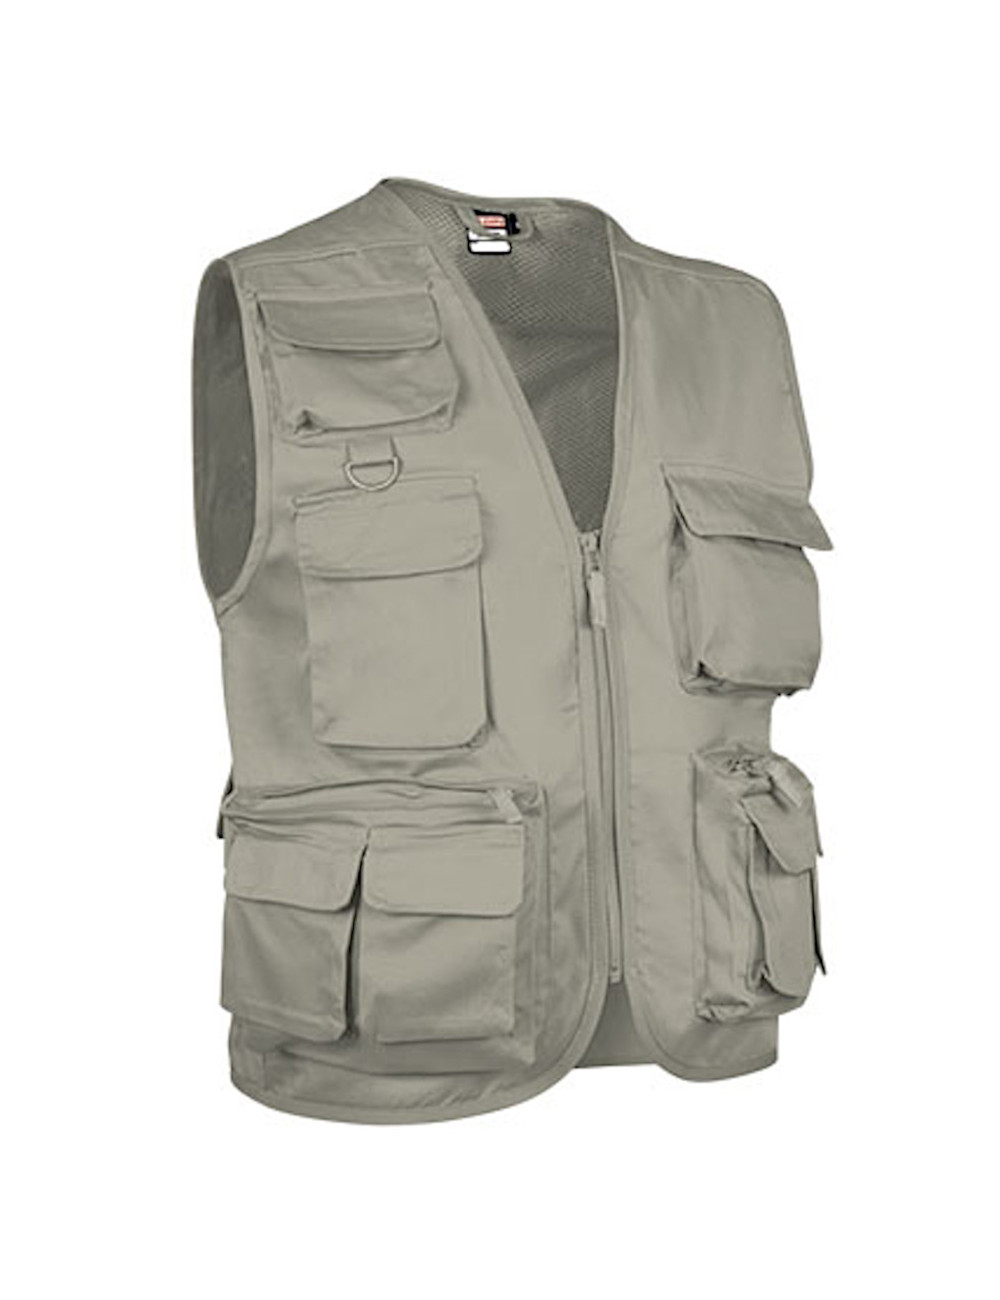 gilet multipoches